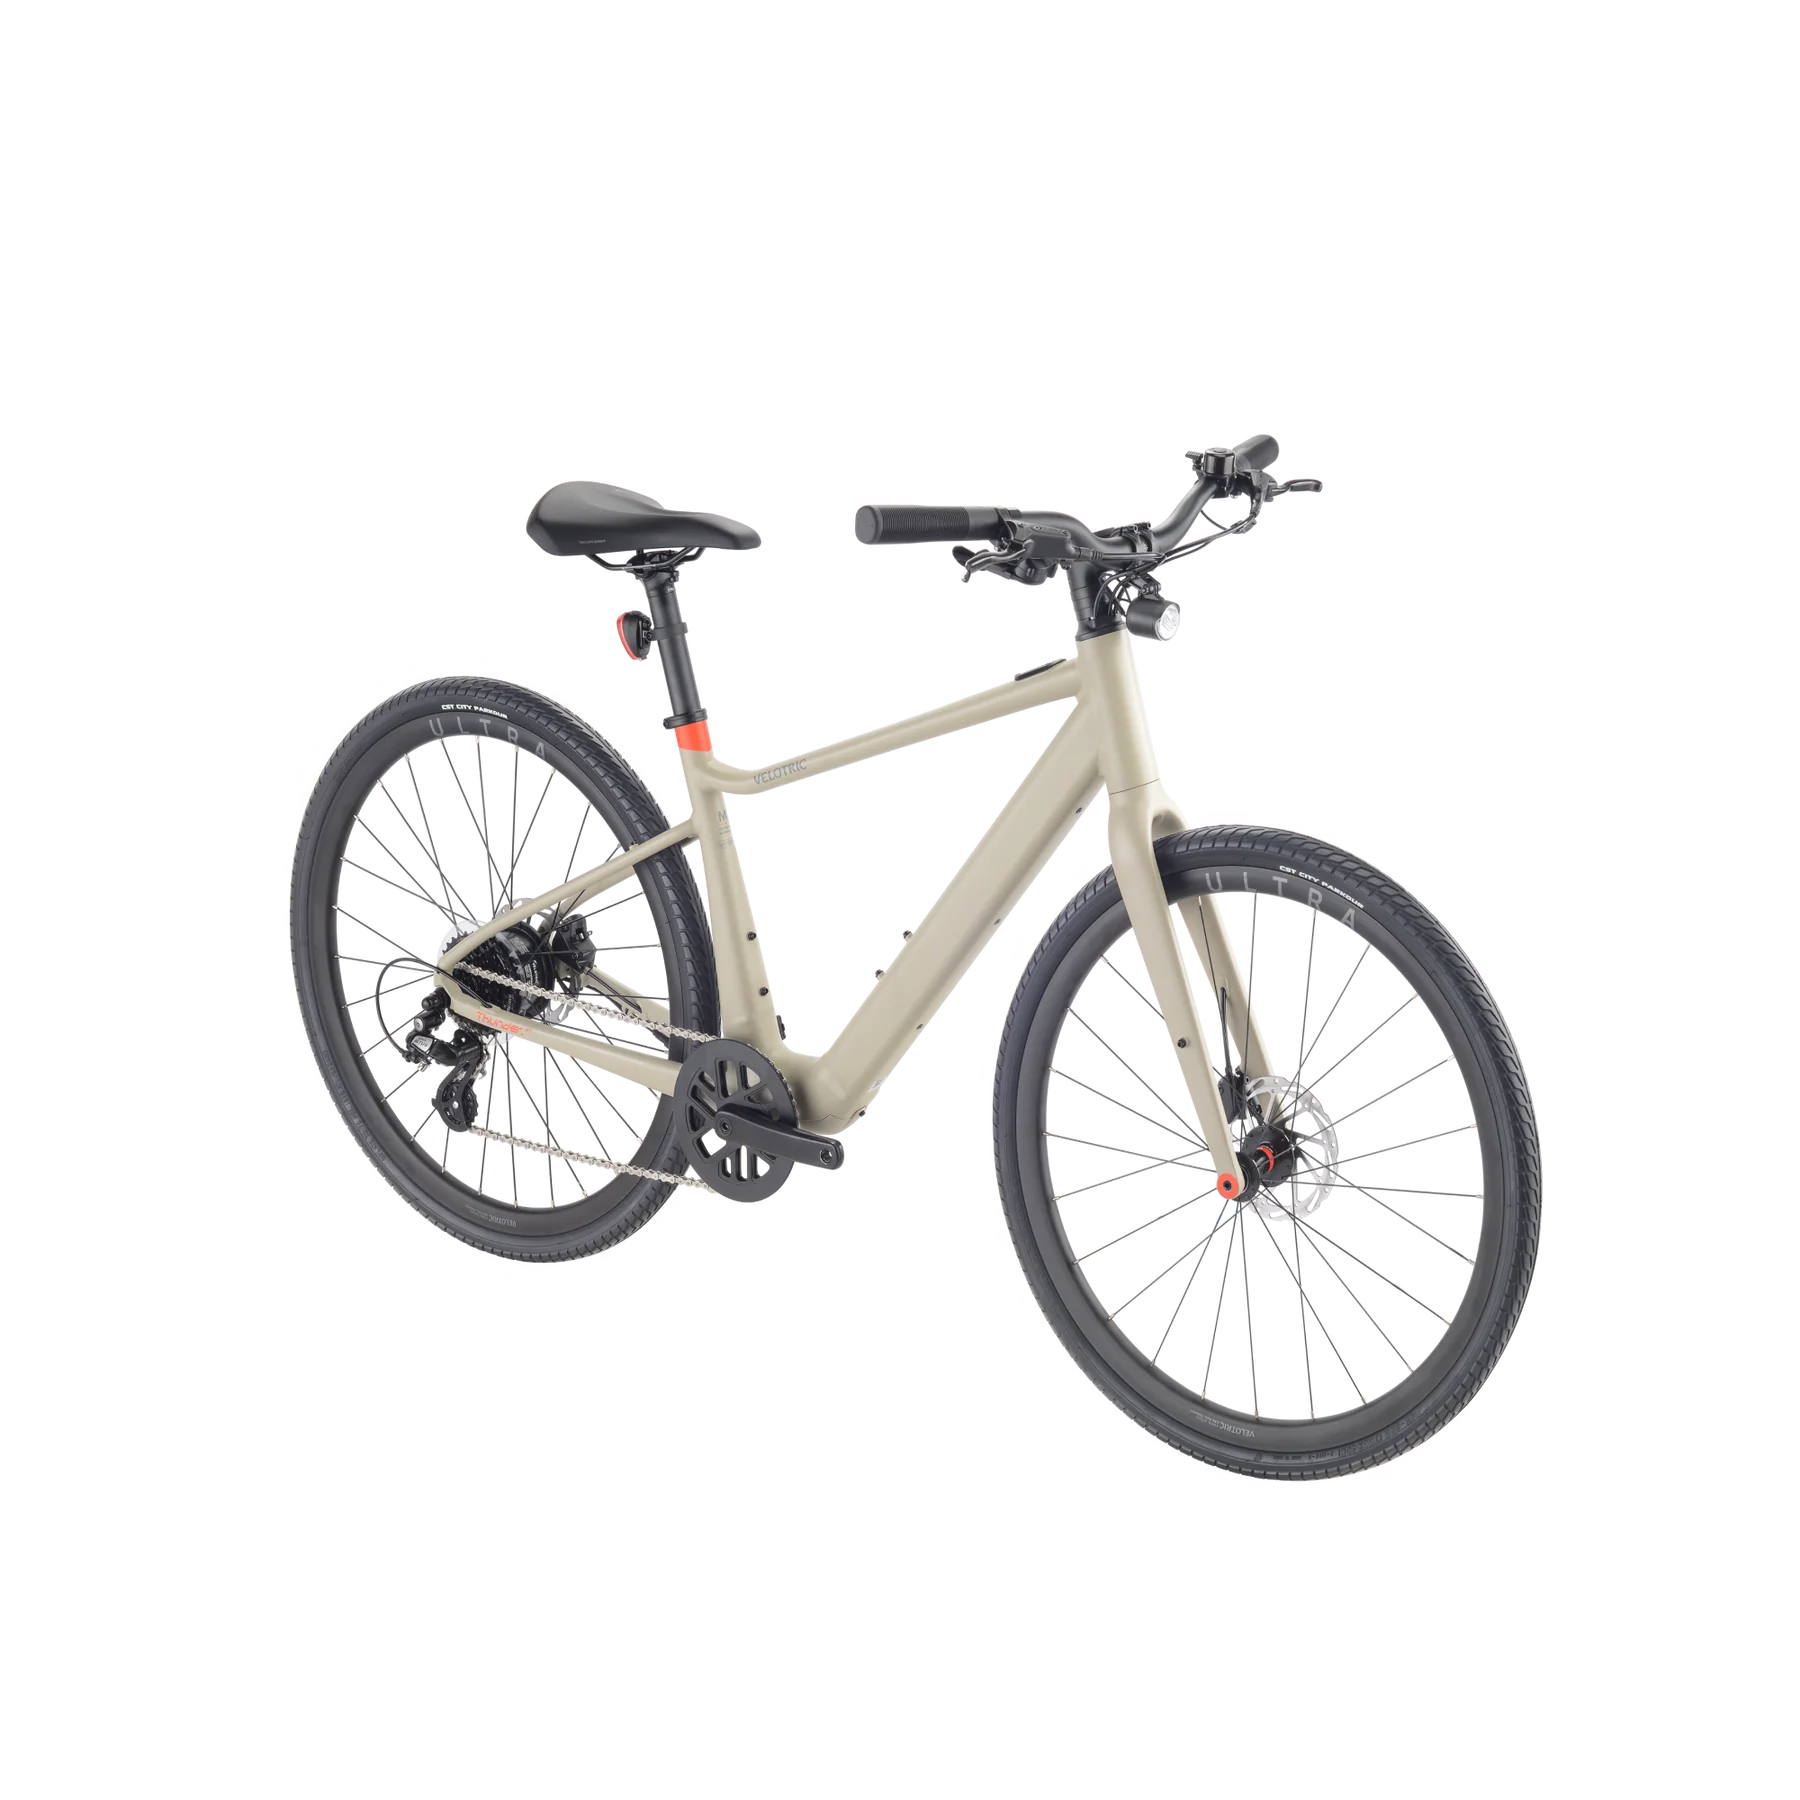 Velotric T1 ST 700c E-Bike – 562 Ebikes Electric Bicycle